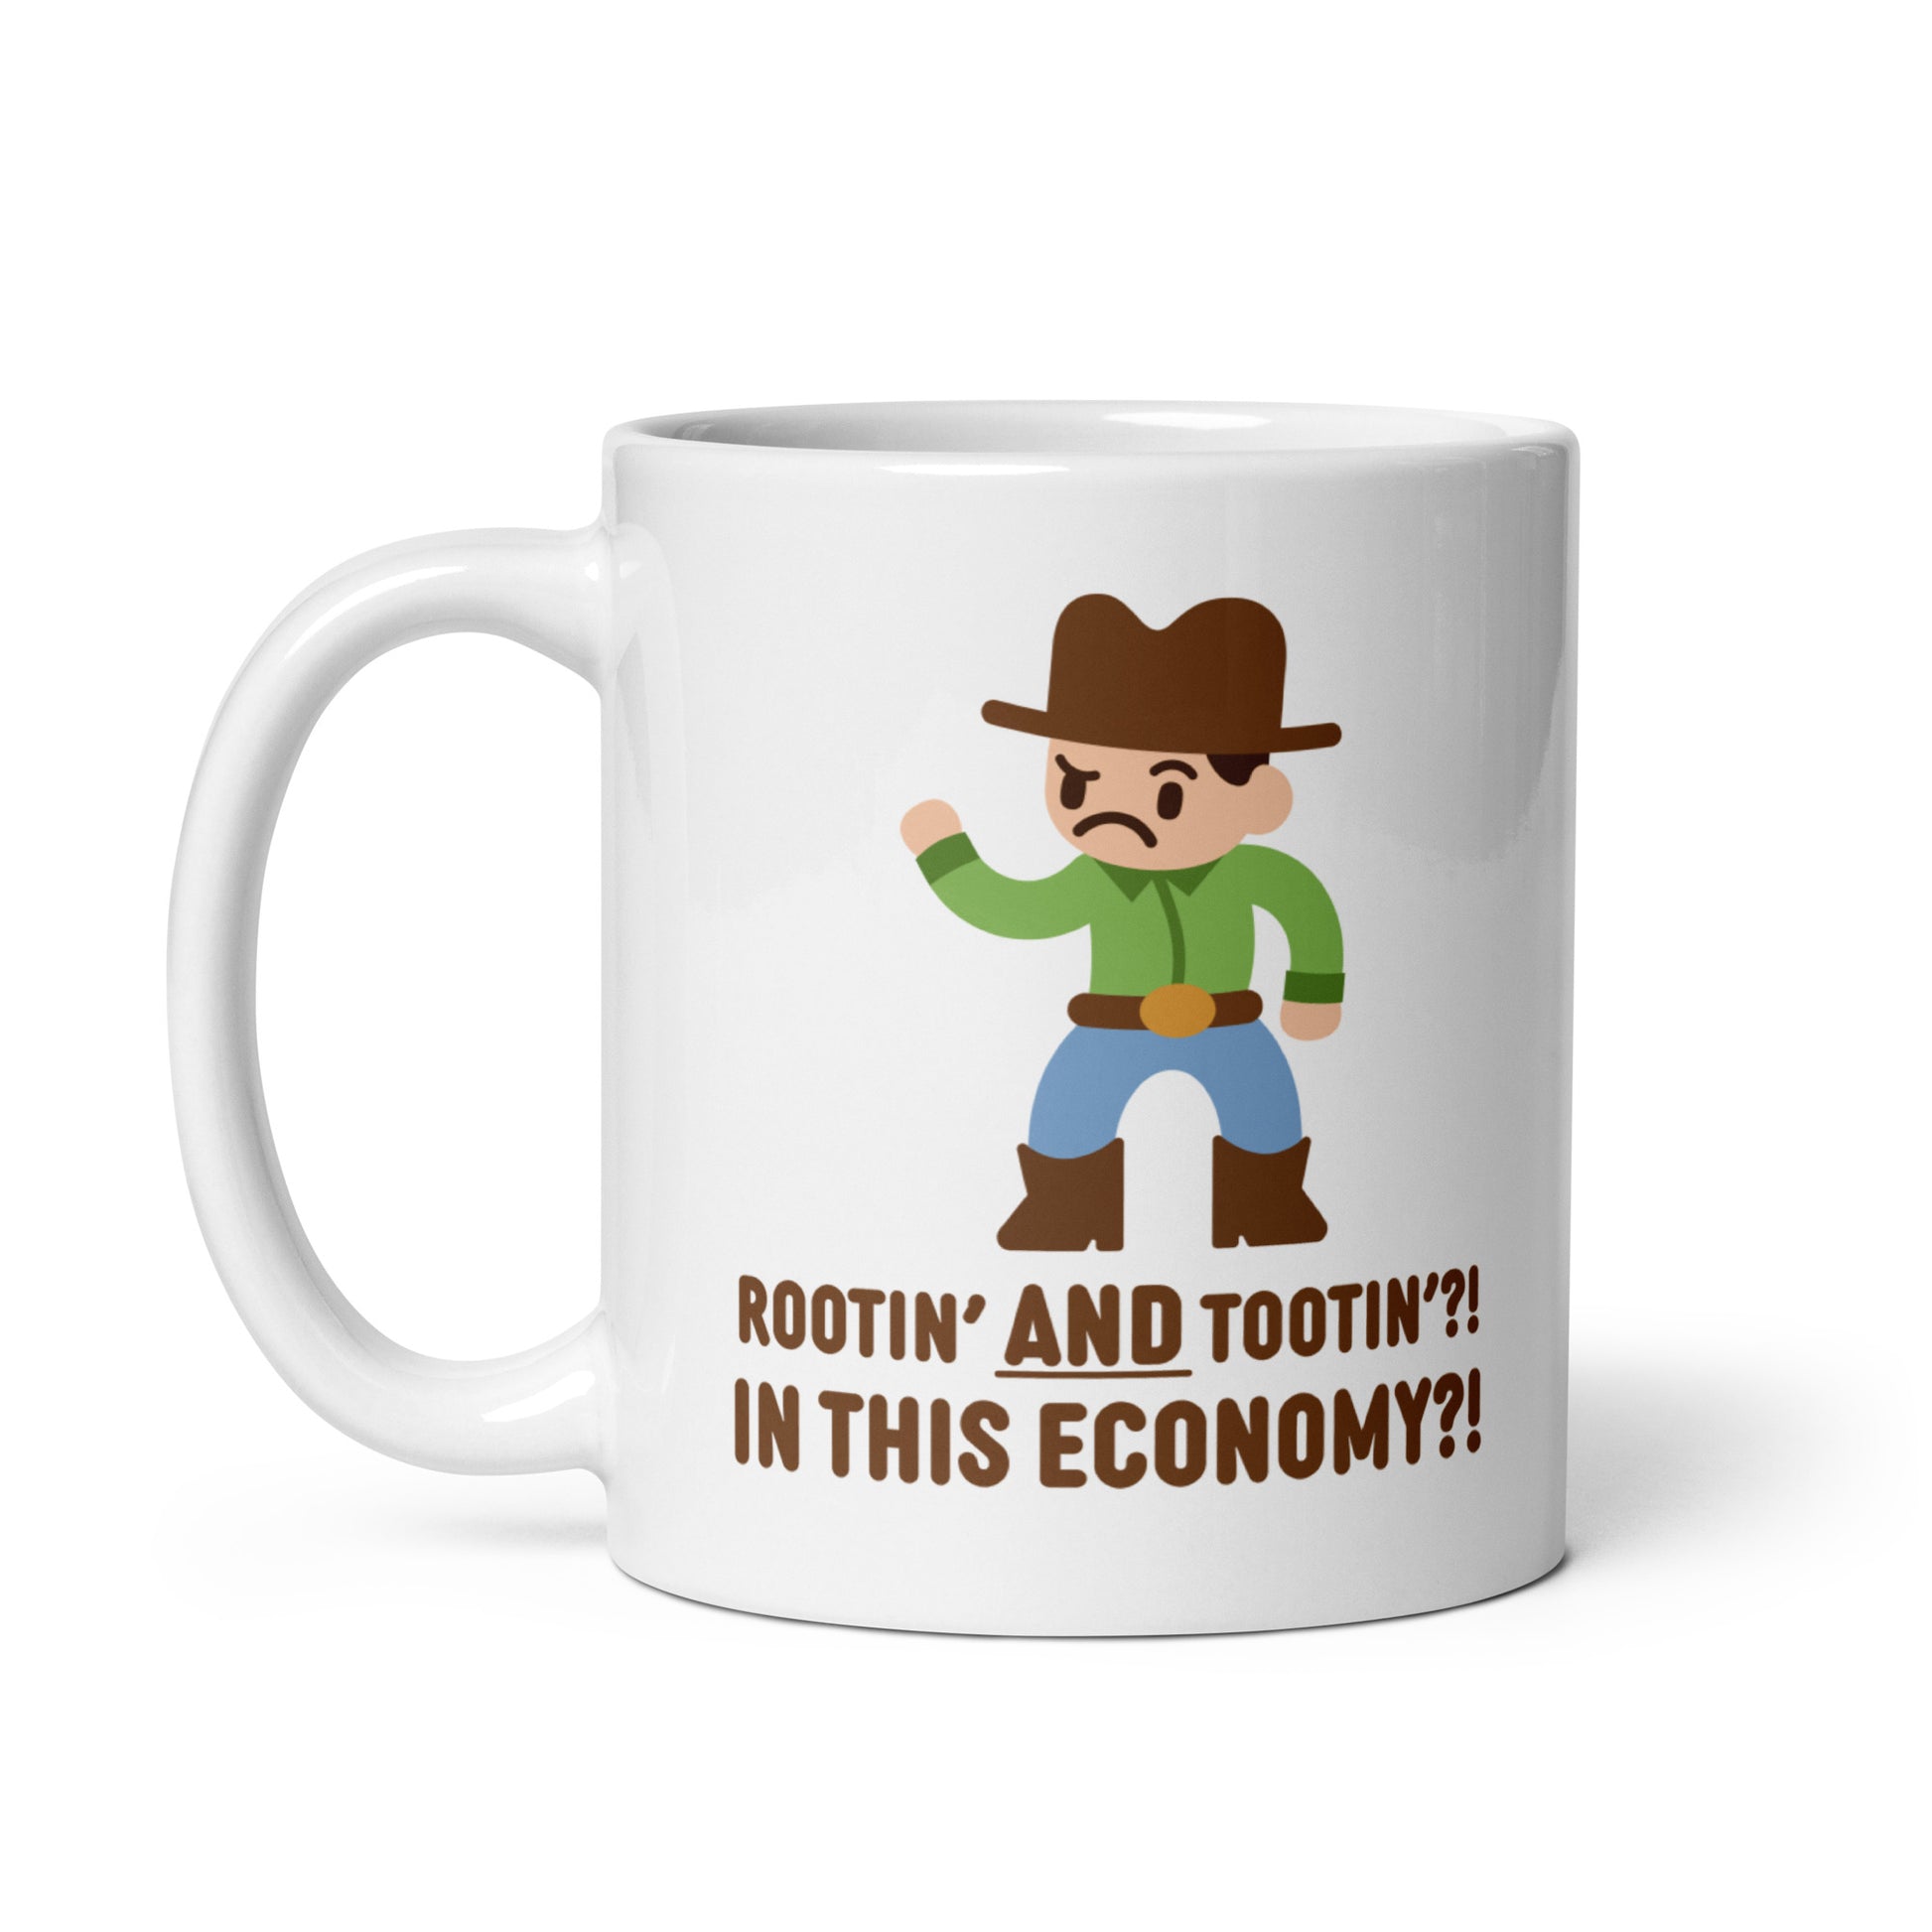 A white 11 ounce ceramic coffee mug featuring an illustration of a confused-looking cowboy wearing a green shirt. Text underneath the cowboy reads "Rootin' AND tootin'?! In this economy?!"